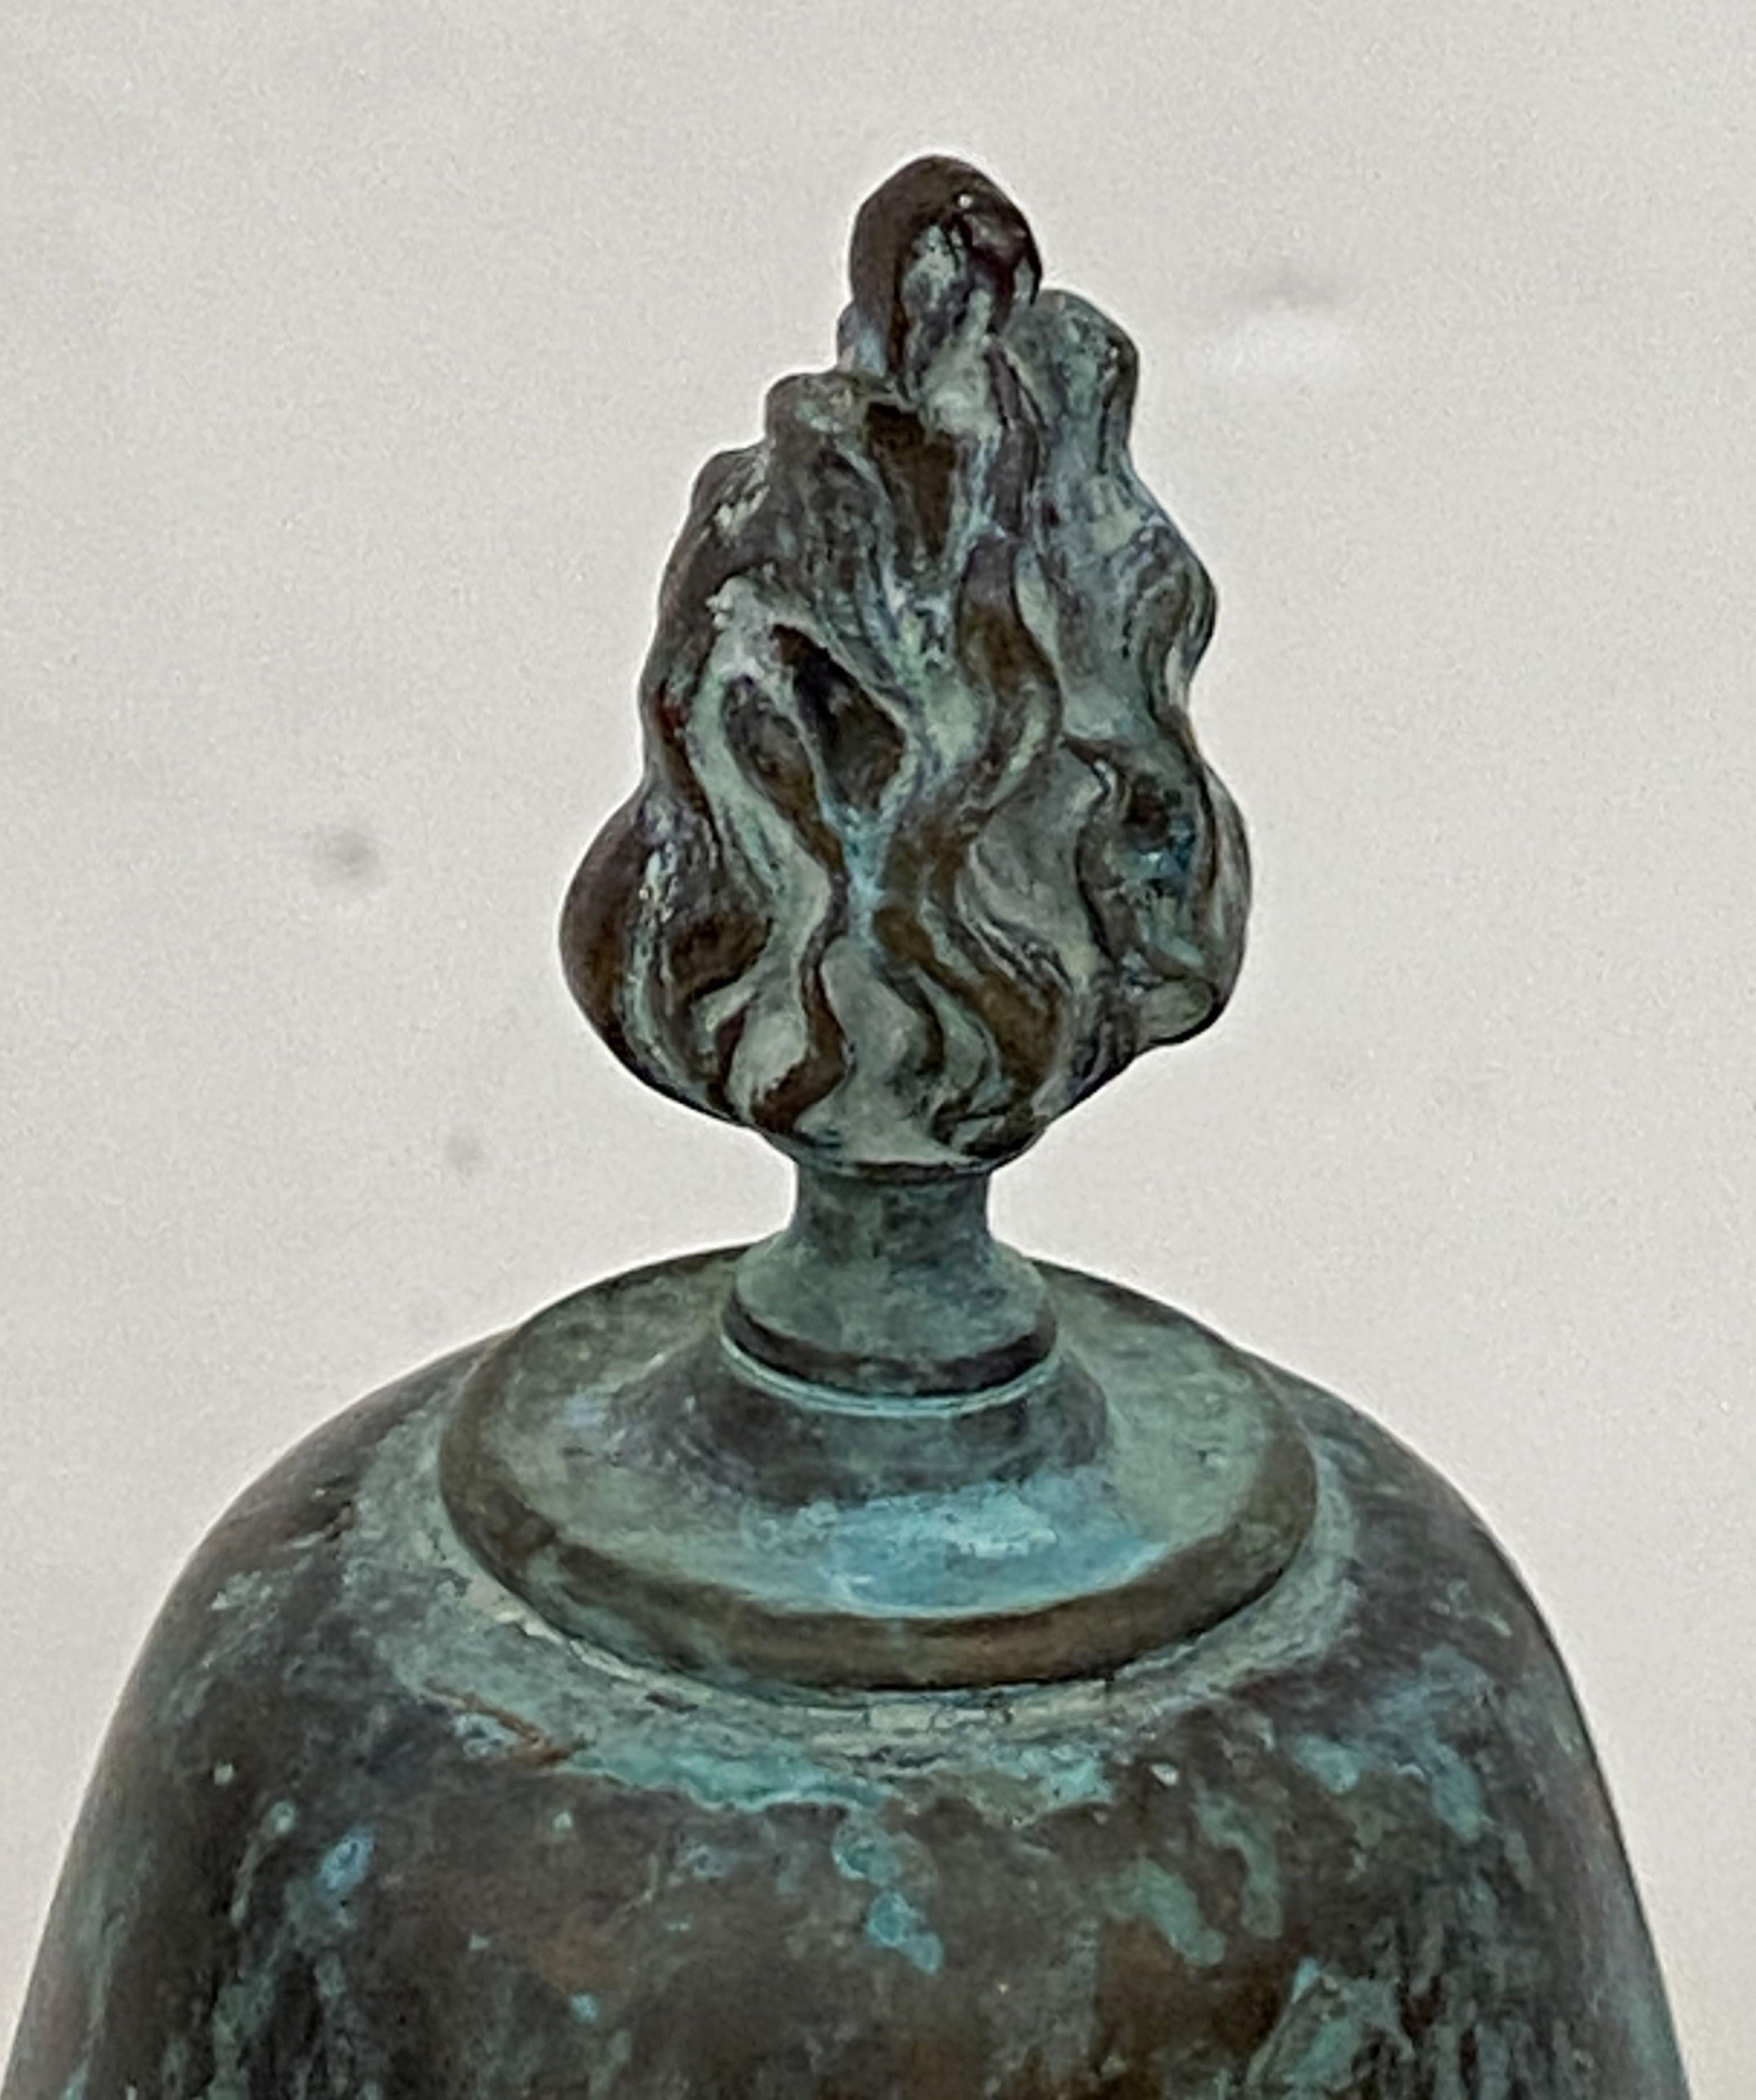 19th Century French Verdigris Copper Urn or Vase with Lid in the Classical Style